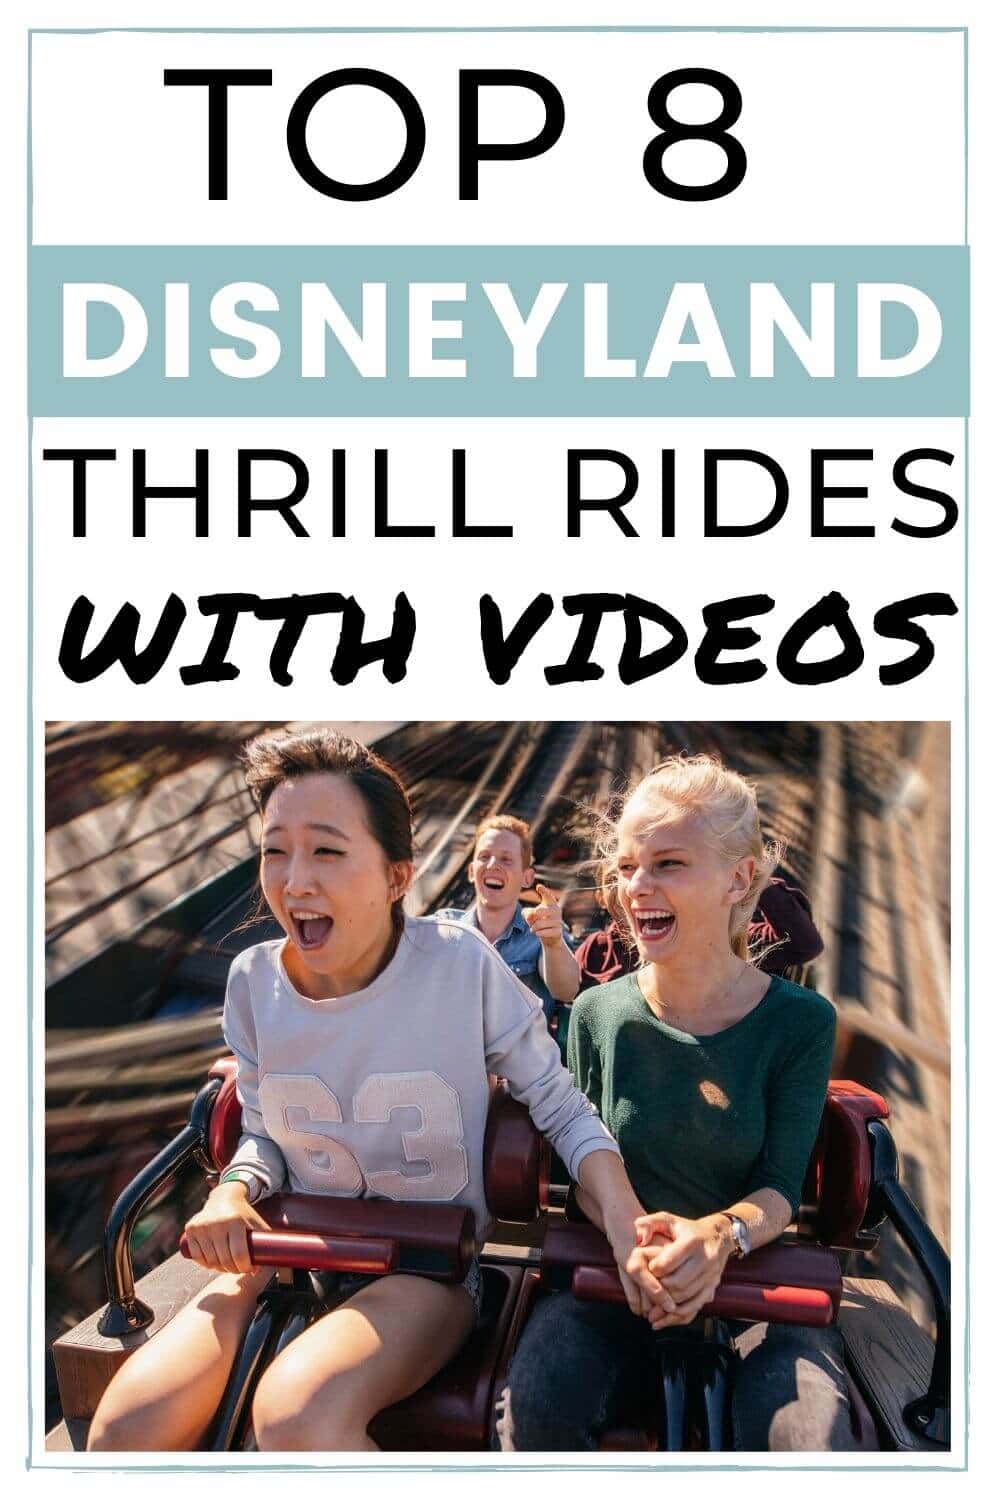 Pin for Top 8 Disneyland Thrill Rides